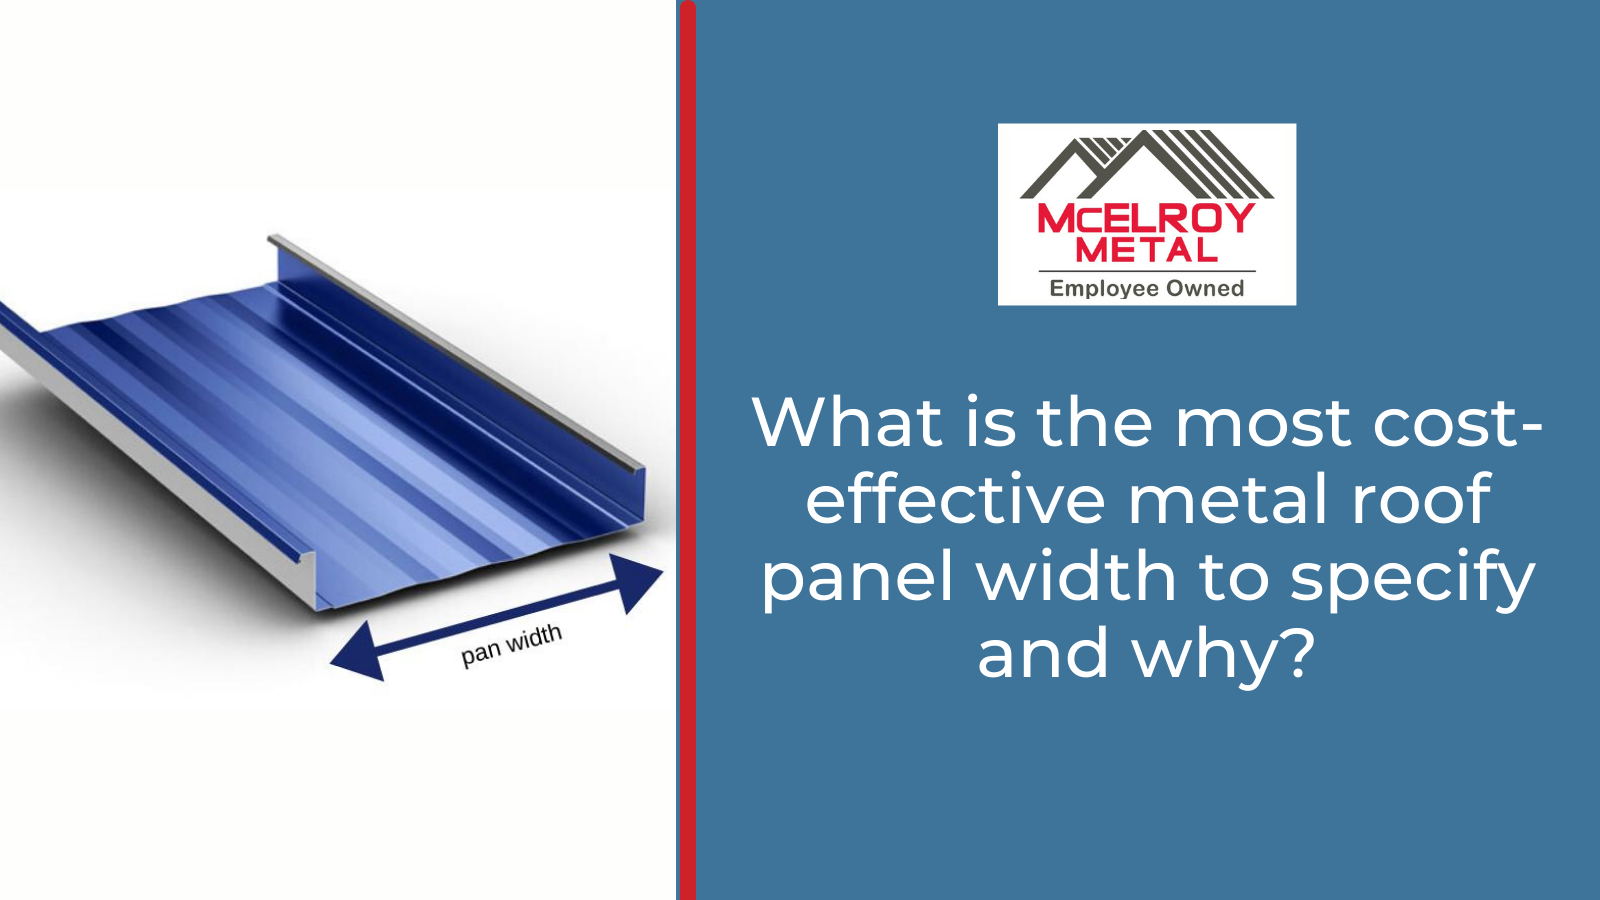 What is the most cost-effective metal roof panel width to specify and why?